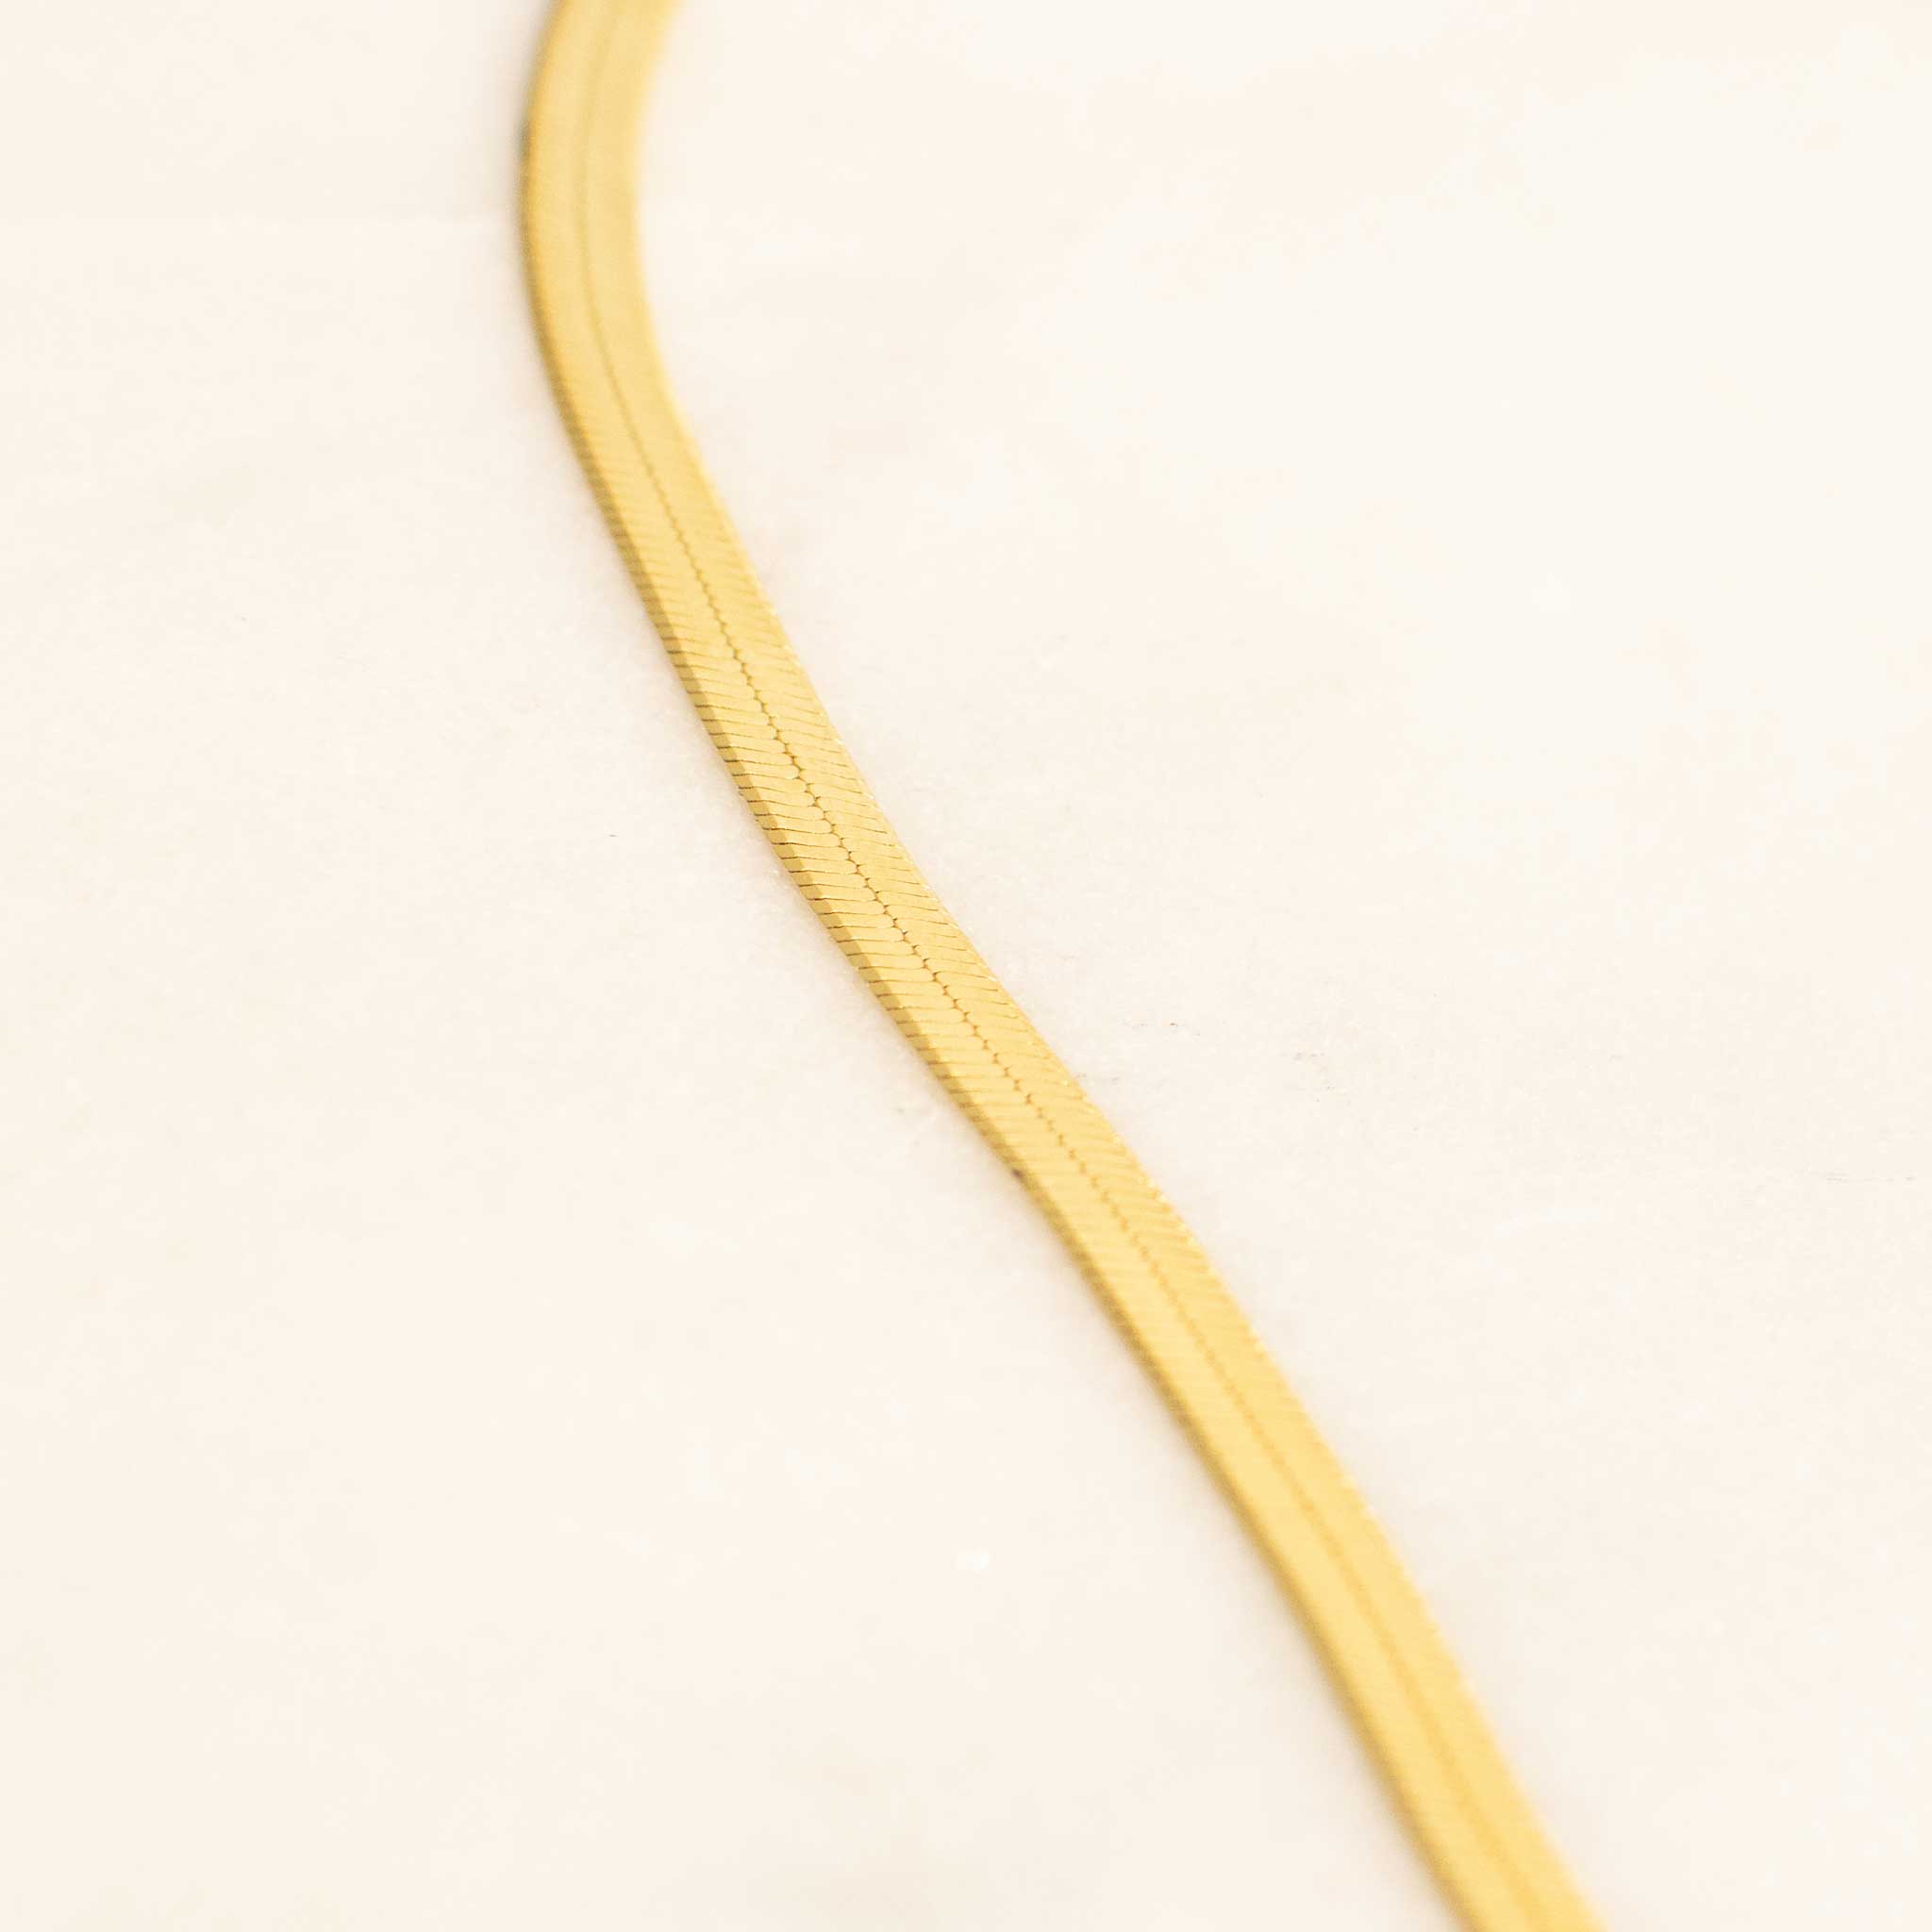 Snake Chain Necklace 46cm/18' in 18ct Gold Vermeil on Sterling Silver 